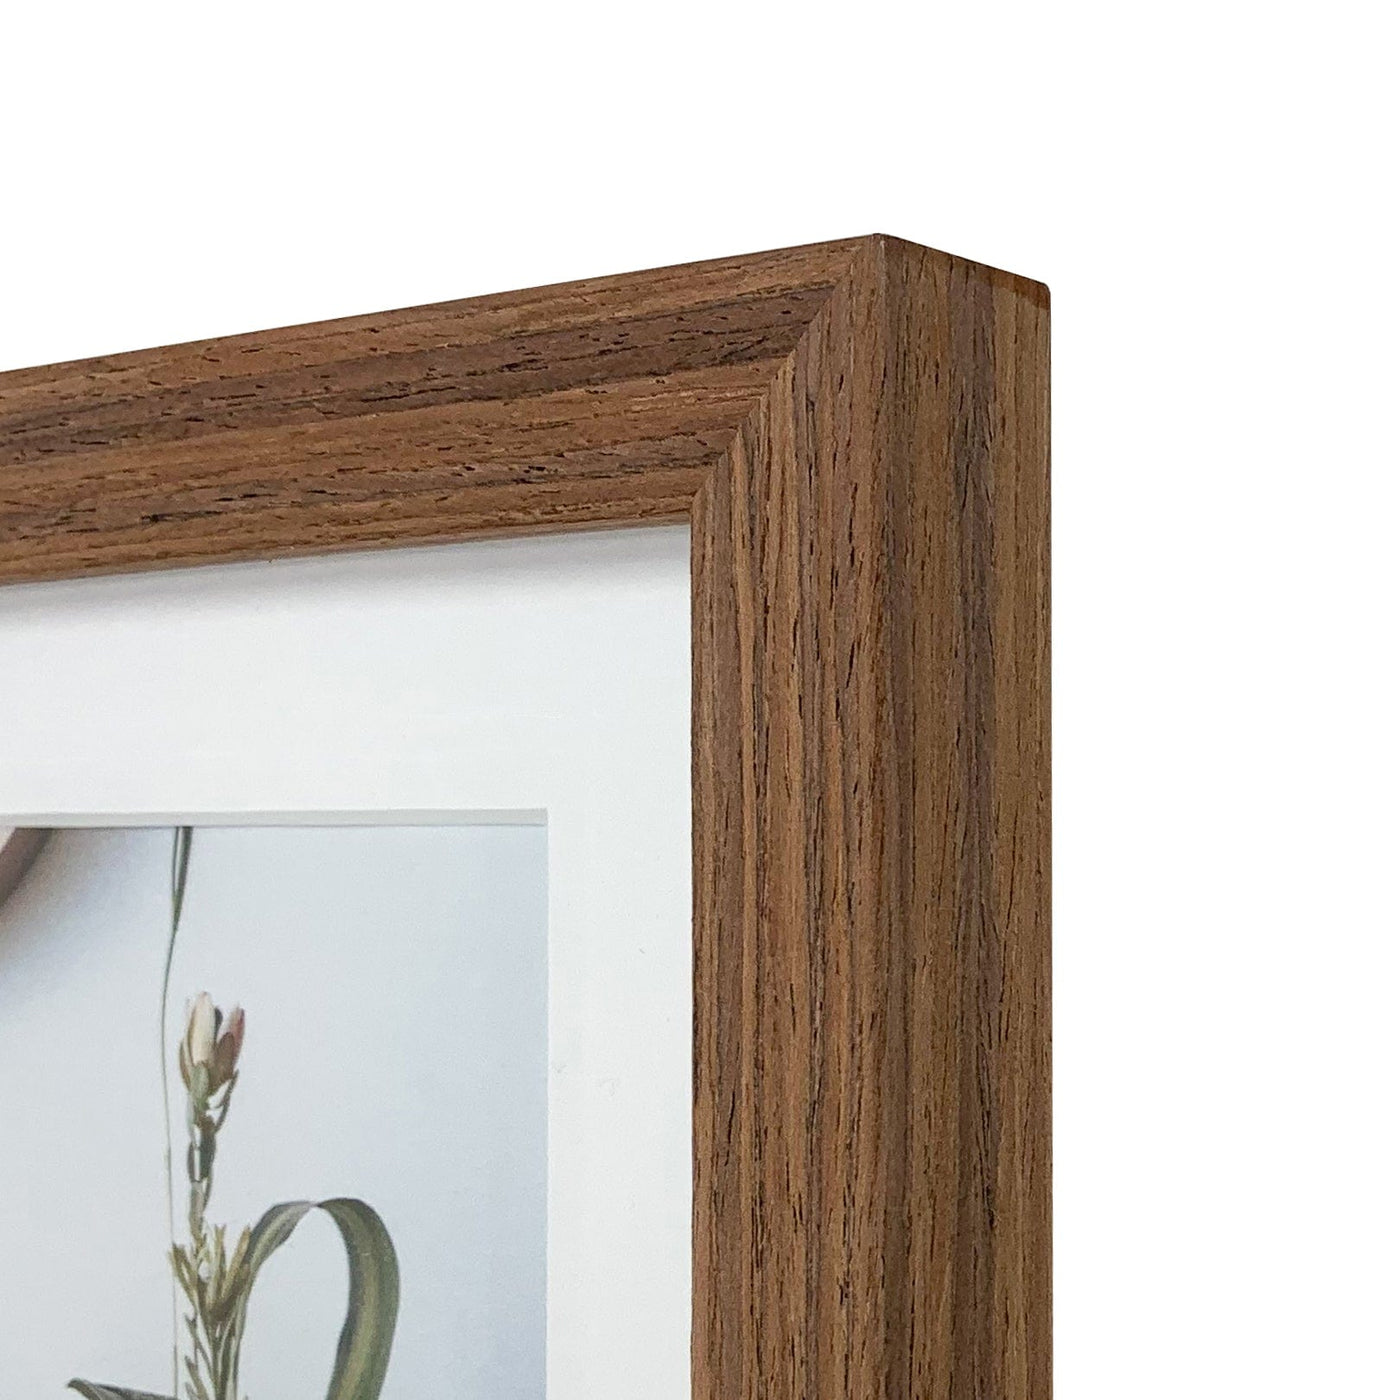 Elegant Chestnut Brown Poster Picture Frame from our Australian Made Picture Frames collection by Profile Products Australia